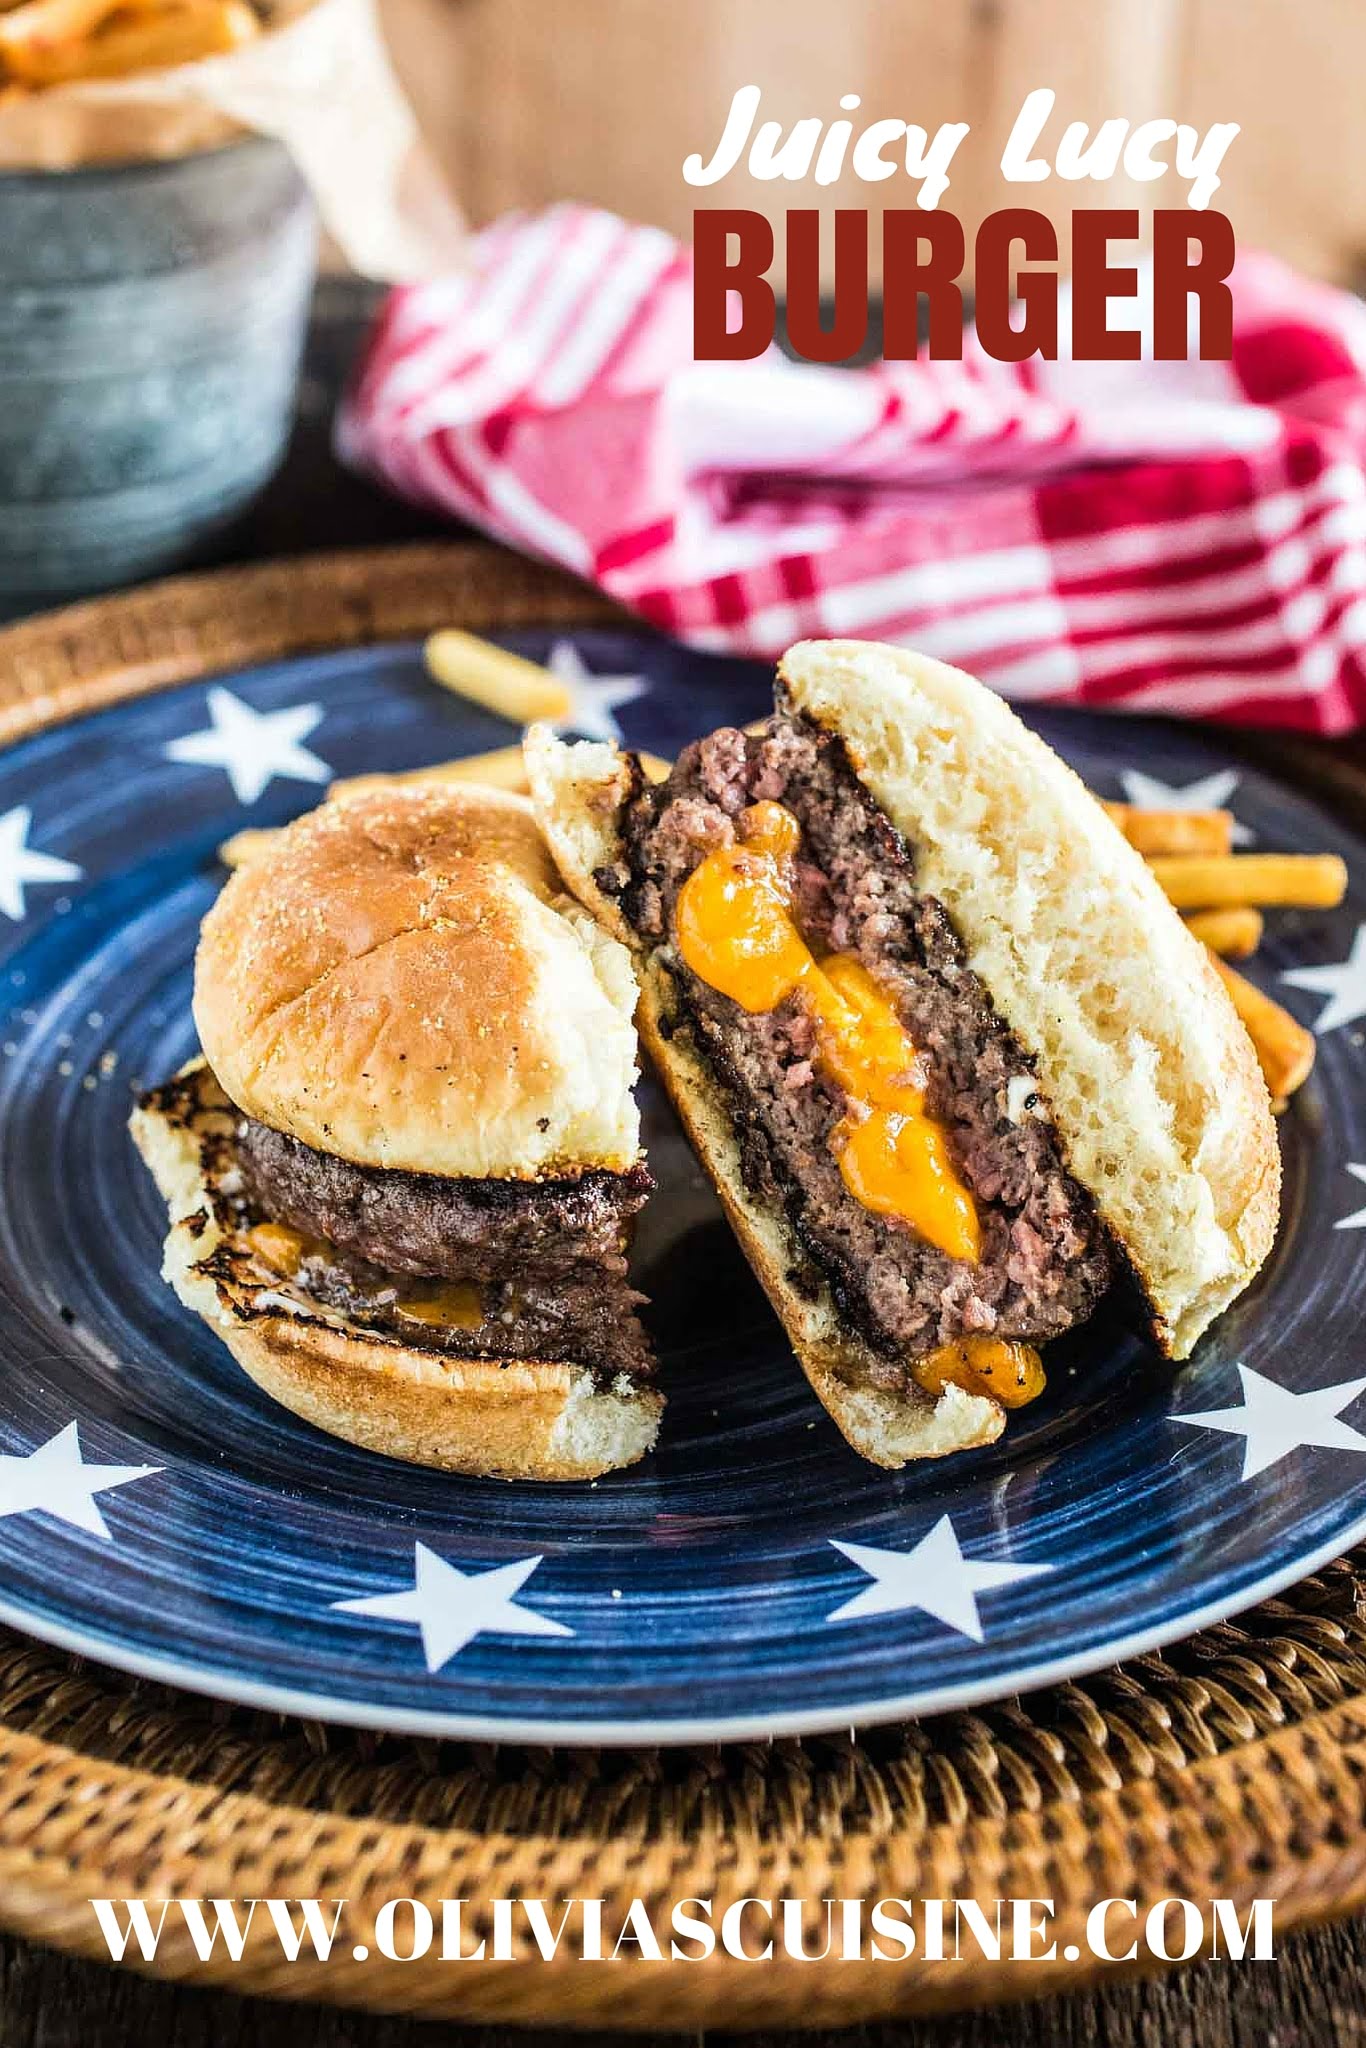 Juicy Lucy Burger | www.oliviascuisine.com | An iconic Minneapolis burger, stuffed with lots of cheese! 